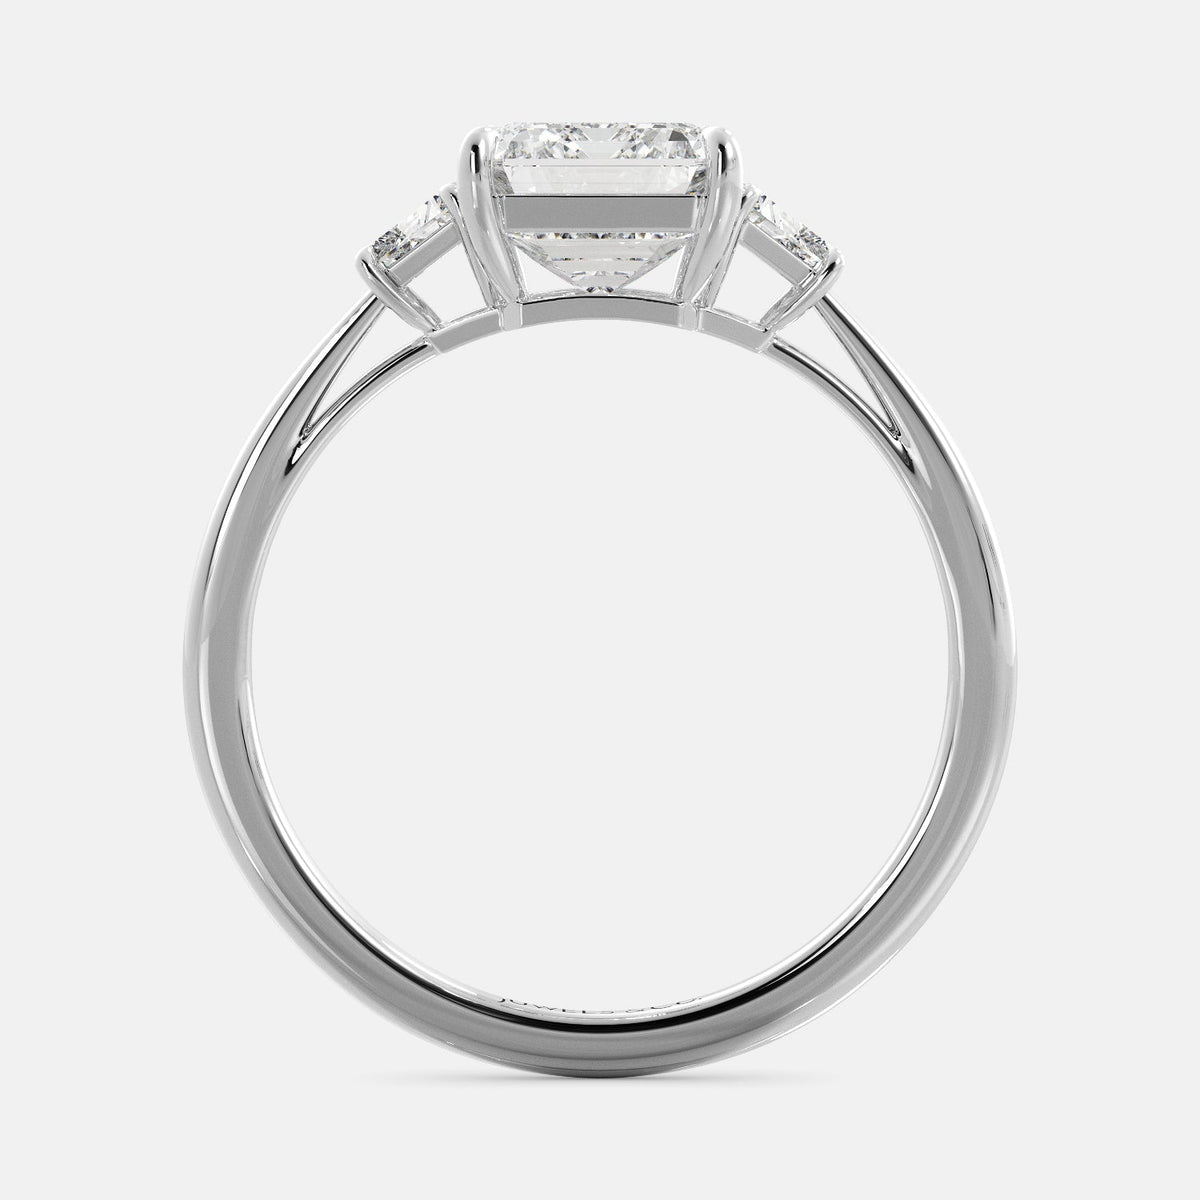 Lab-grown Emerald Cut Diamond Ring with side baguettes, white gold 14K